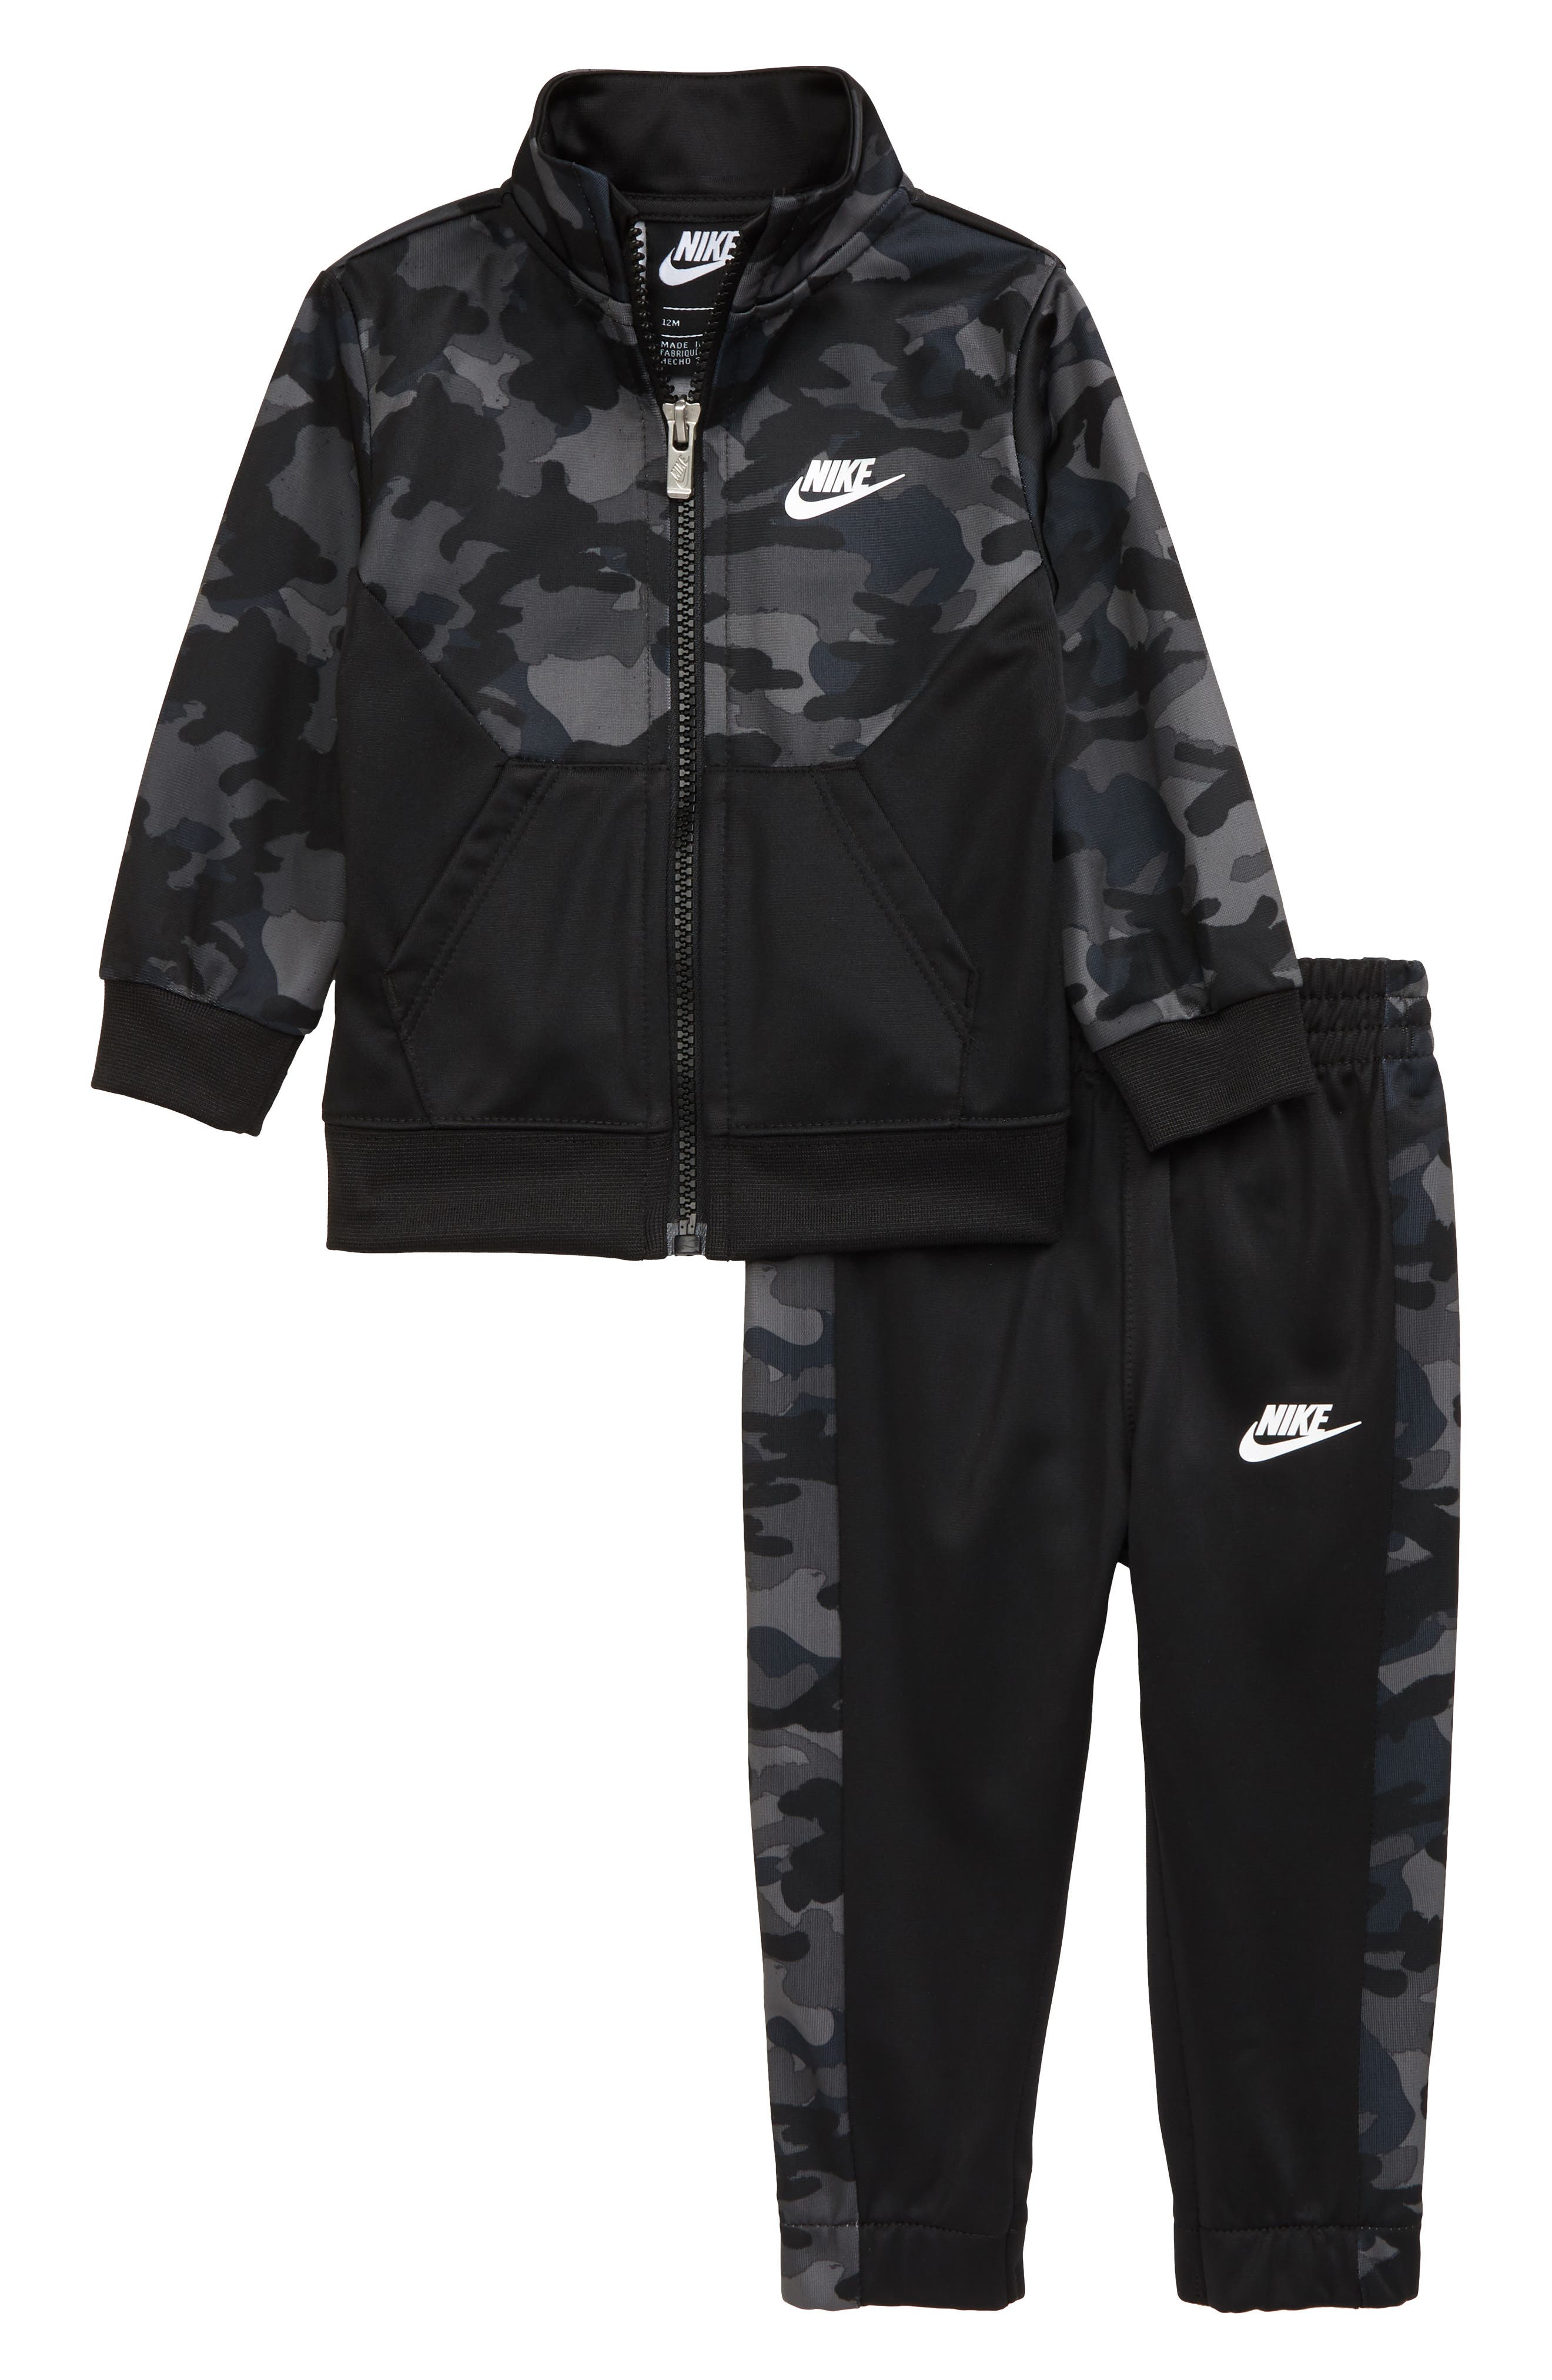 Baby Nike Clothing | Nordstrom